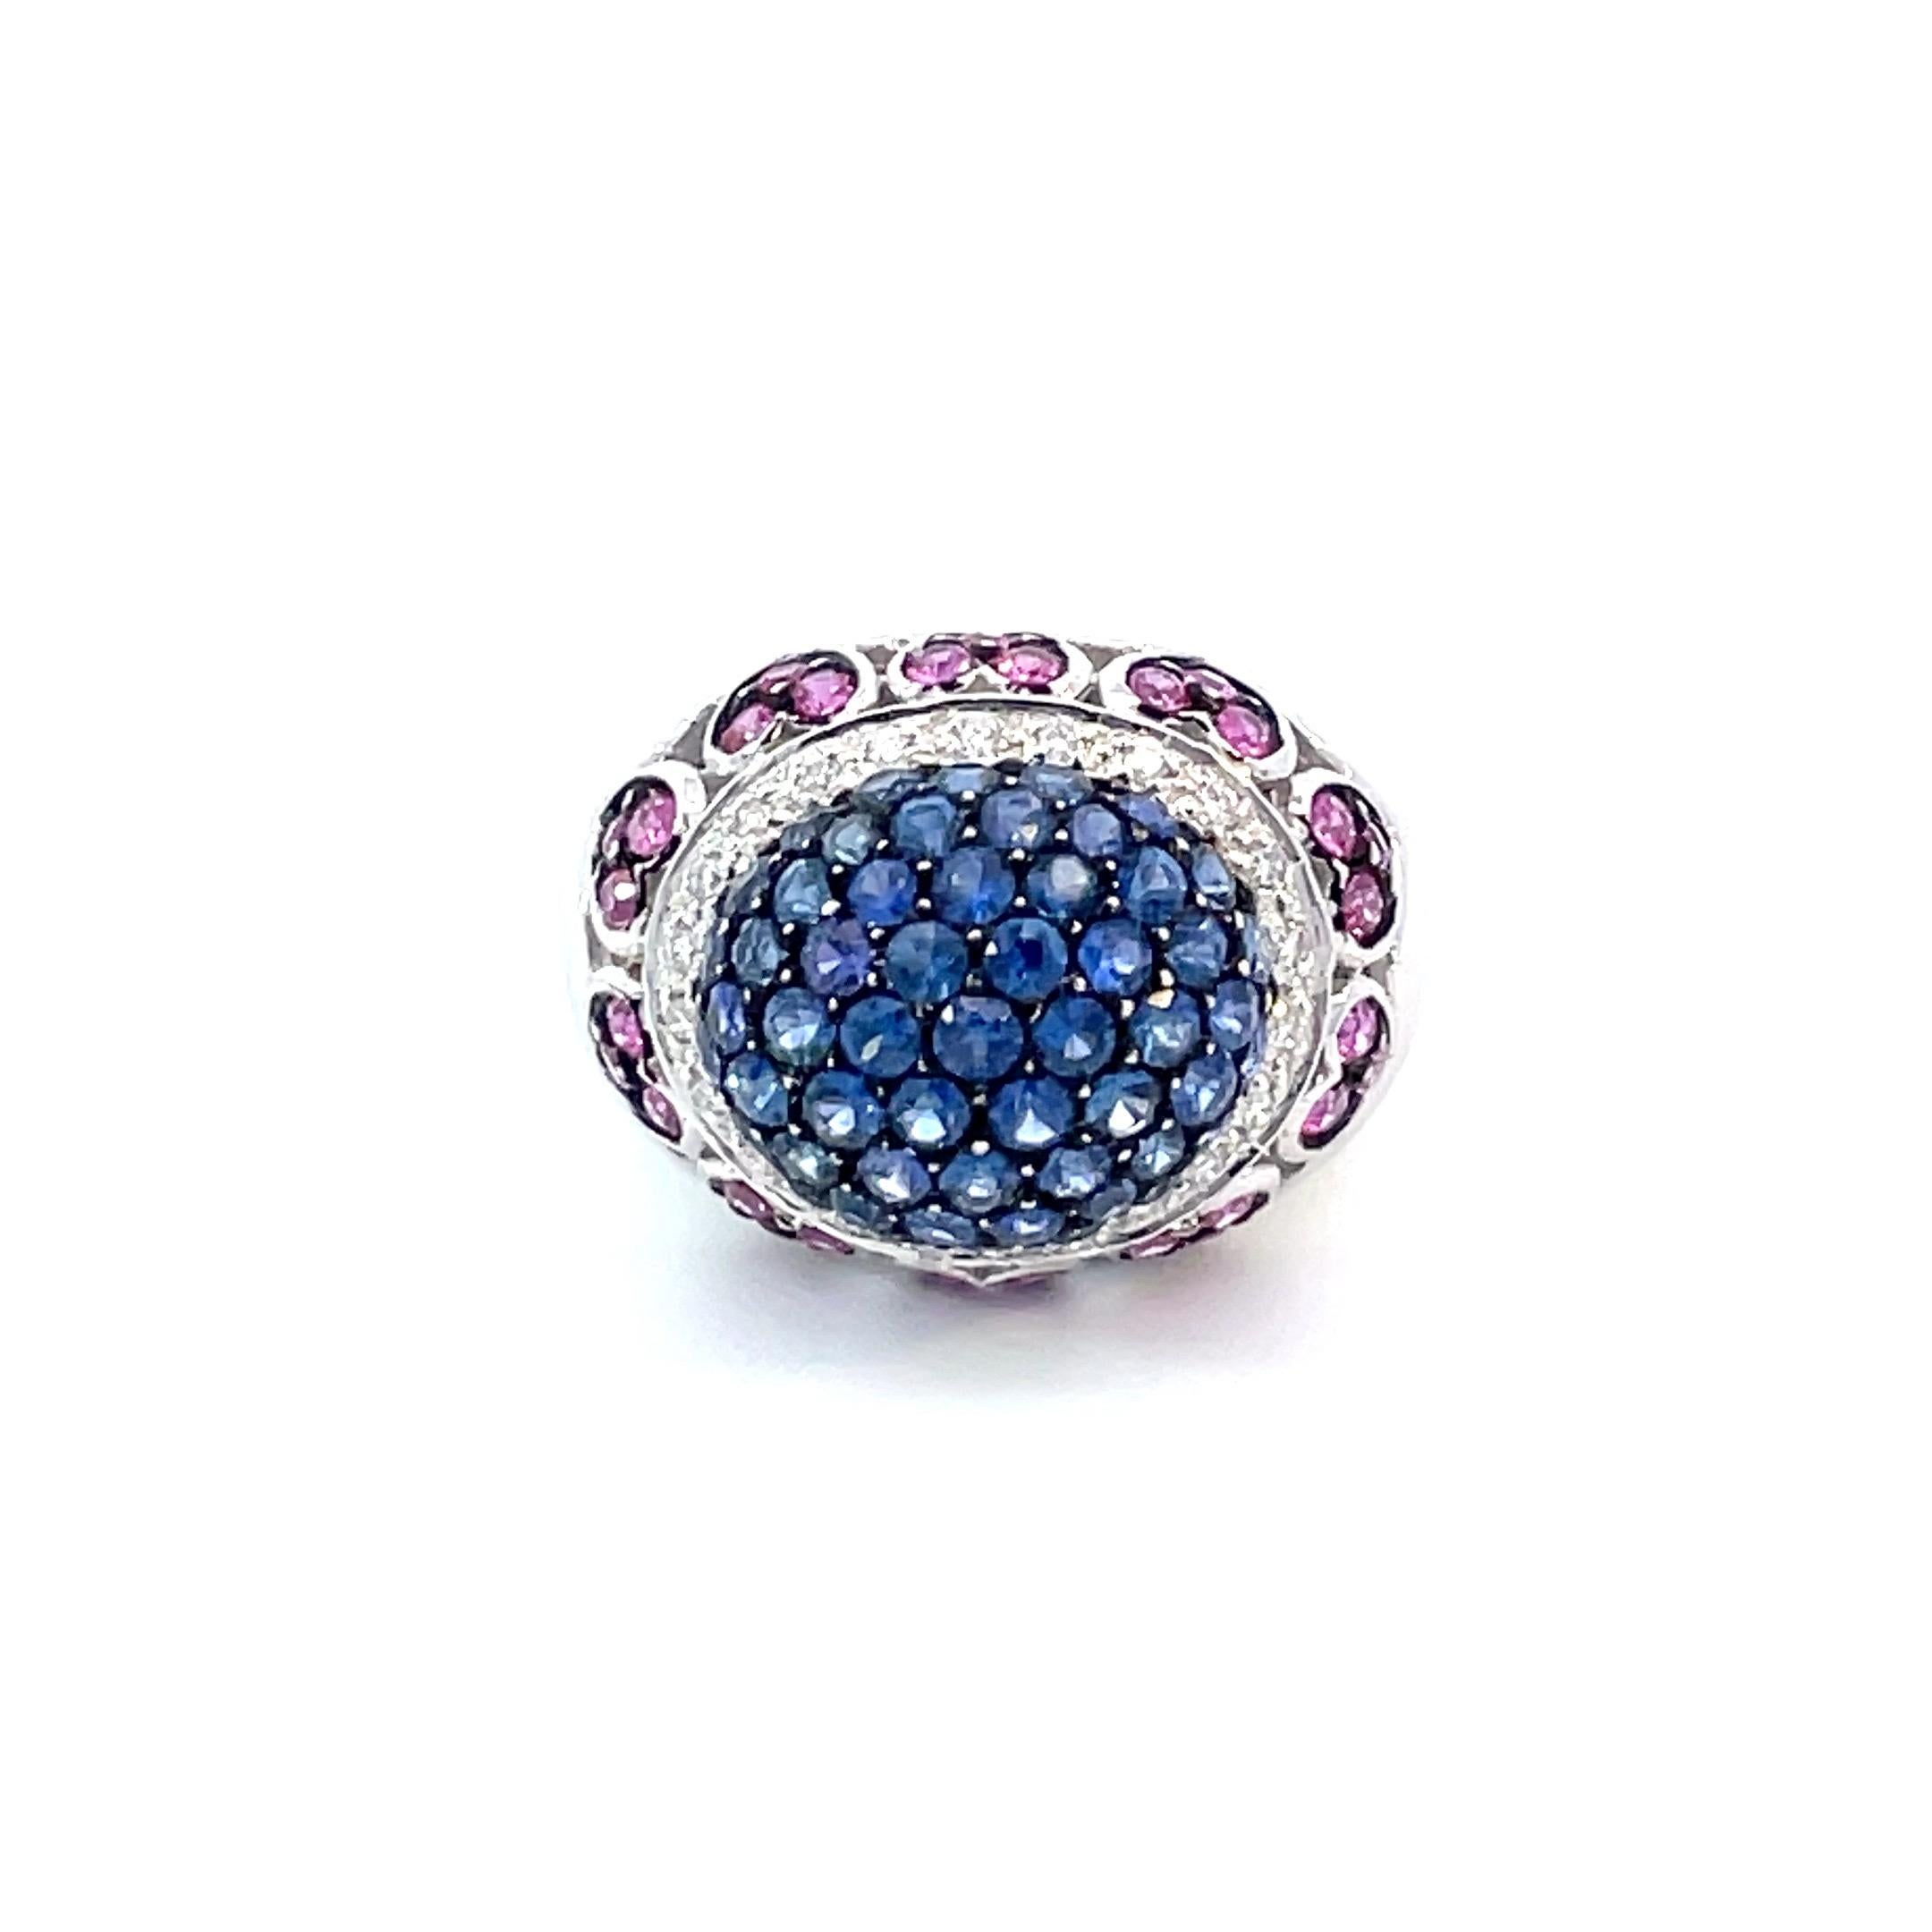 One dome ring set in centre with natural blue sapphires with a black rhodium finish surrounded by a row of brilliant cut white diamonds and below that a row of heart motif set with natural  deep pink sapphires with a black rhodium finish in 18kt